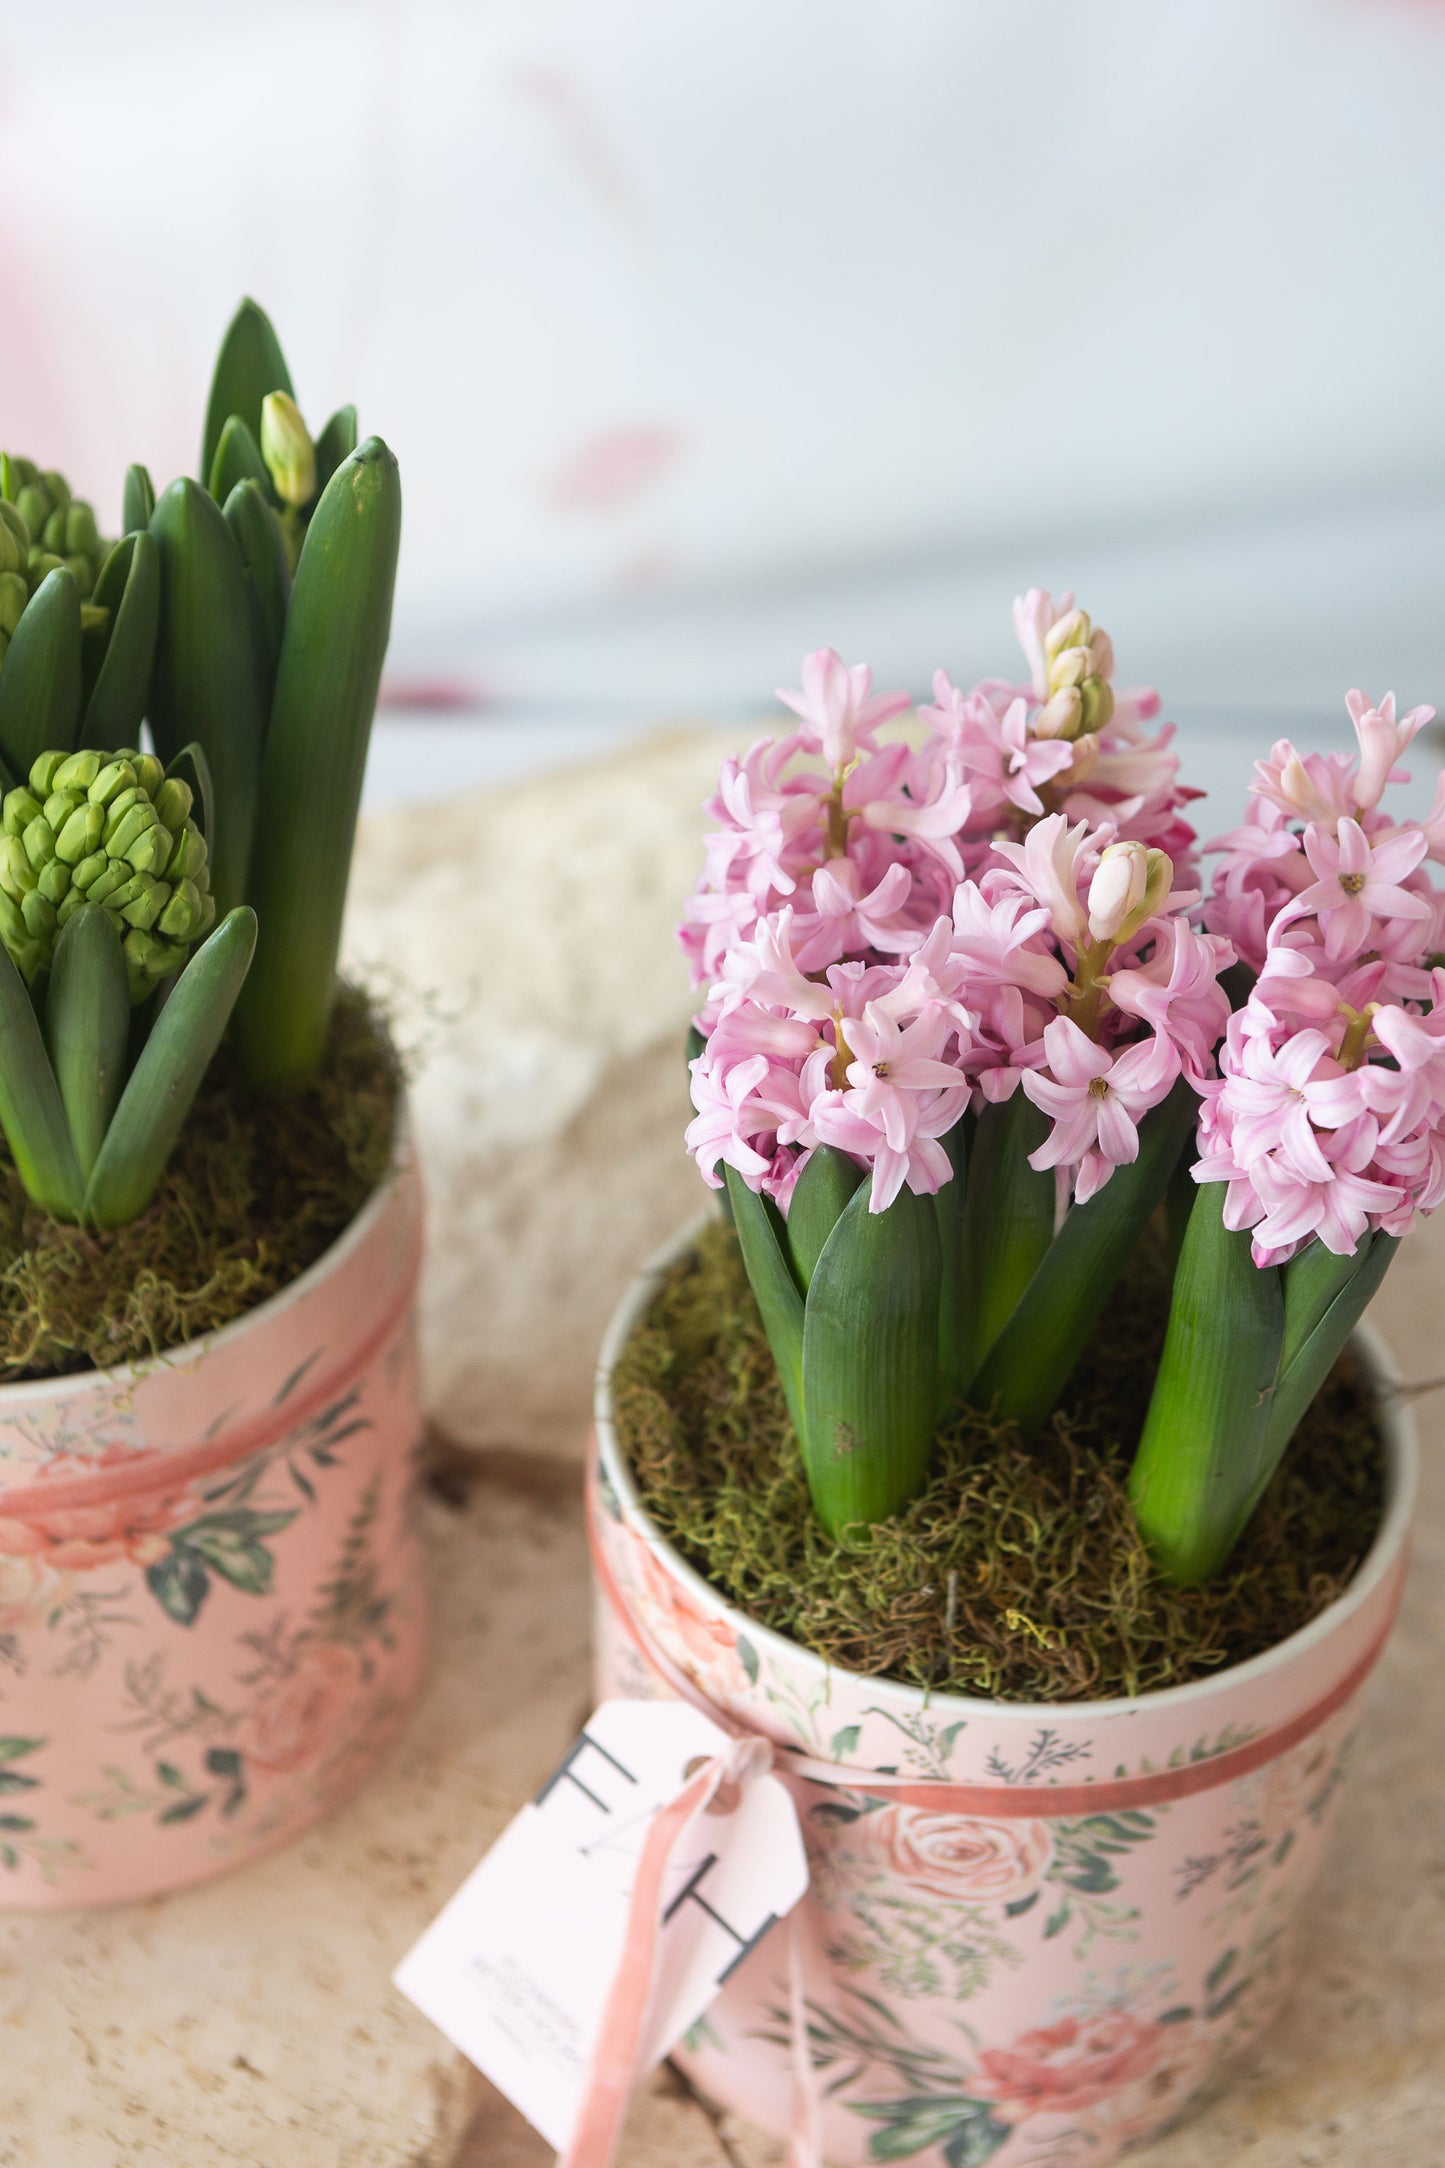 FIELDS OF PINK: POTTED HYACINTHS